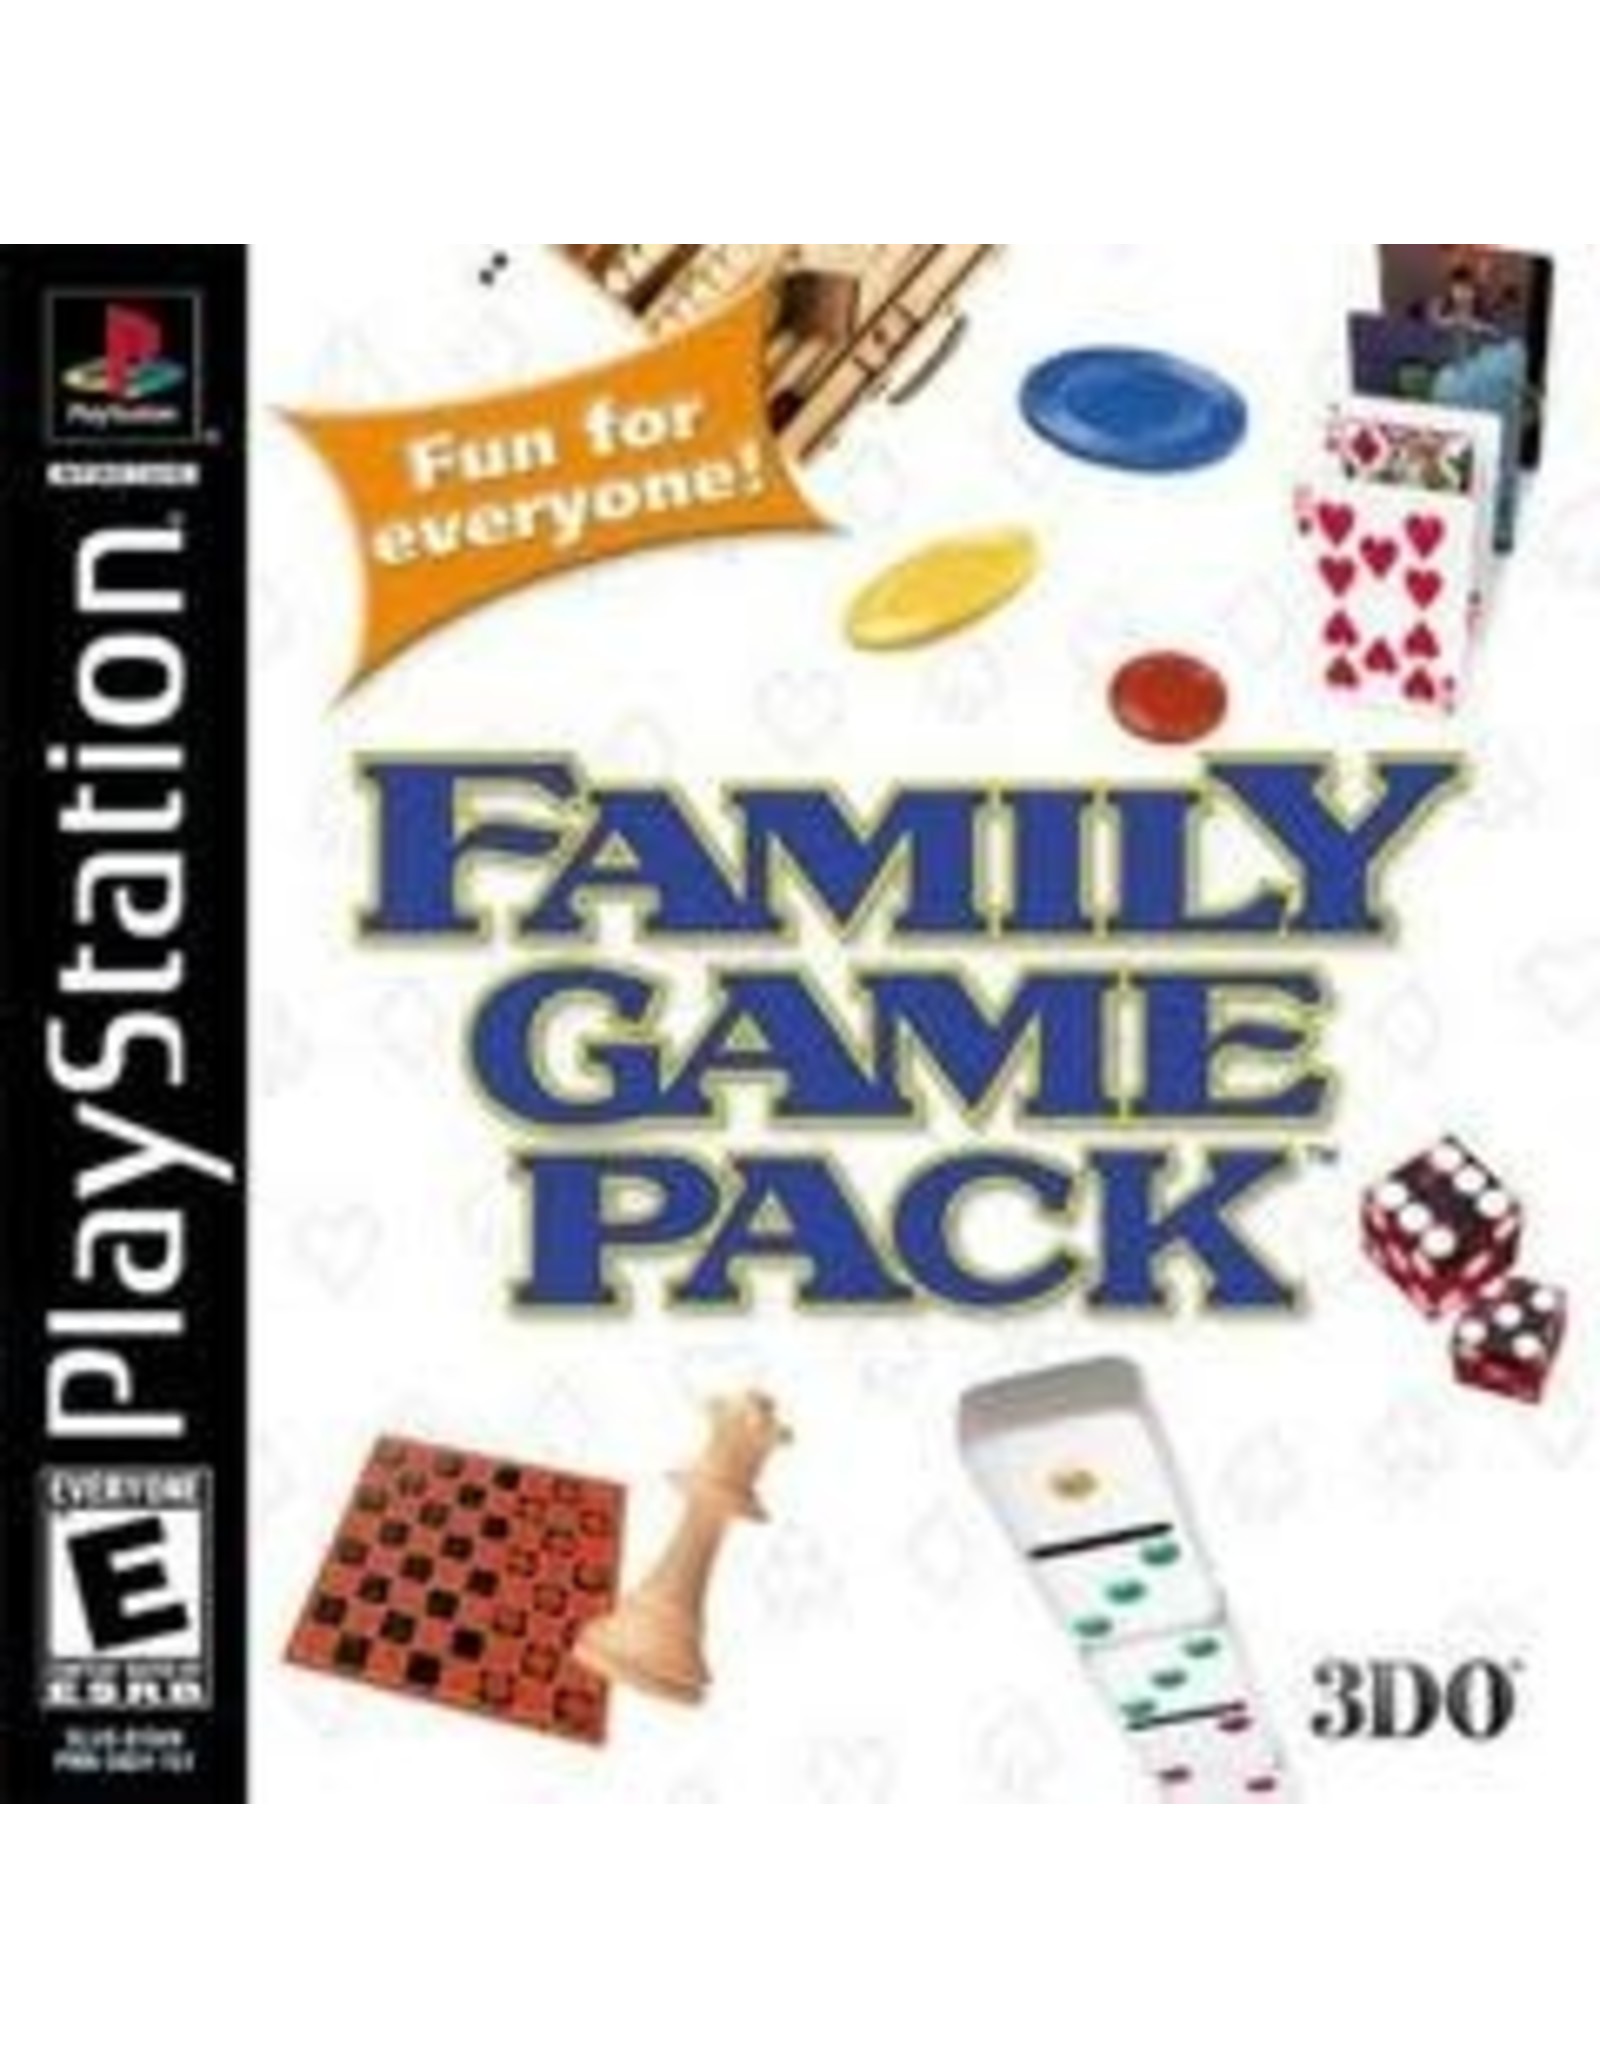 Playstation Family Game Pack (CiB)